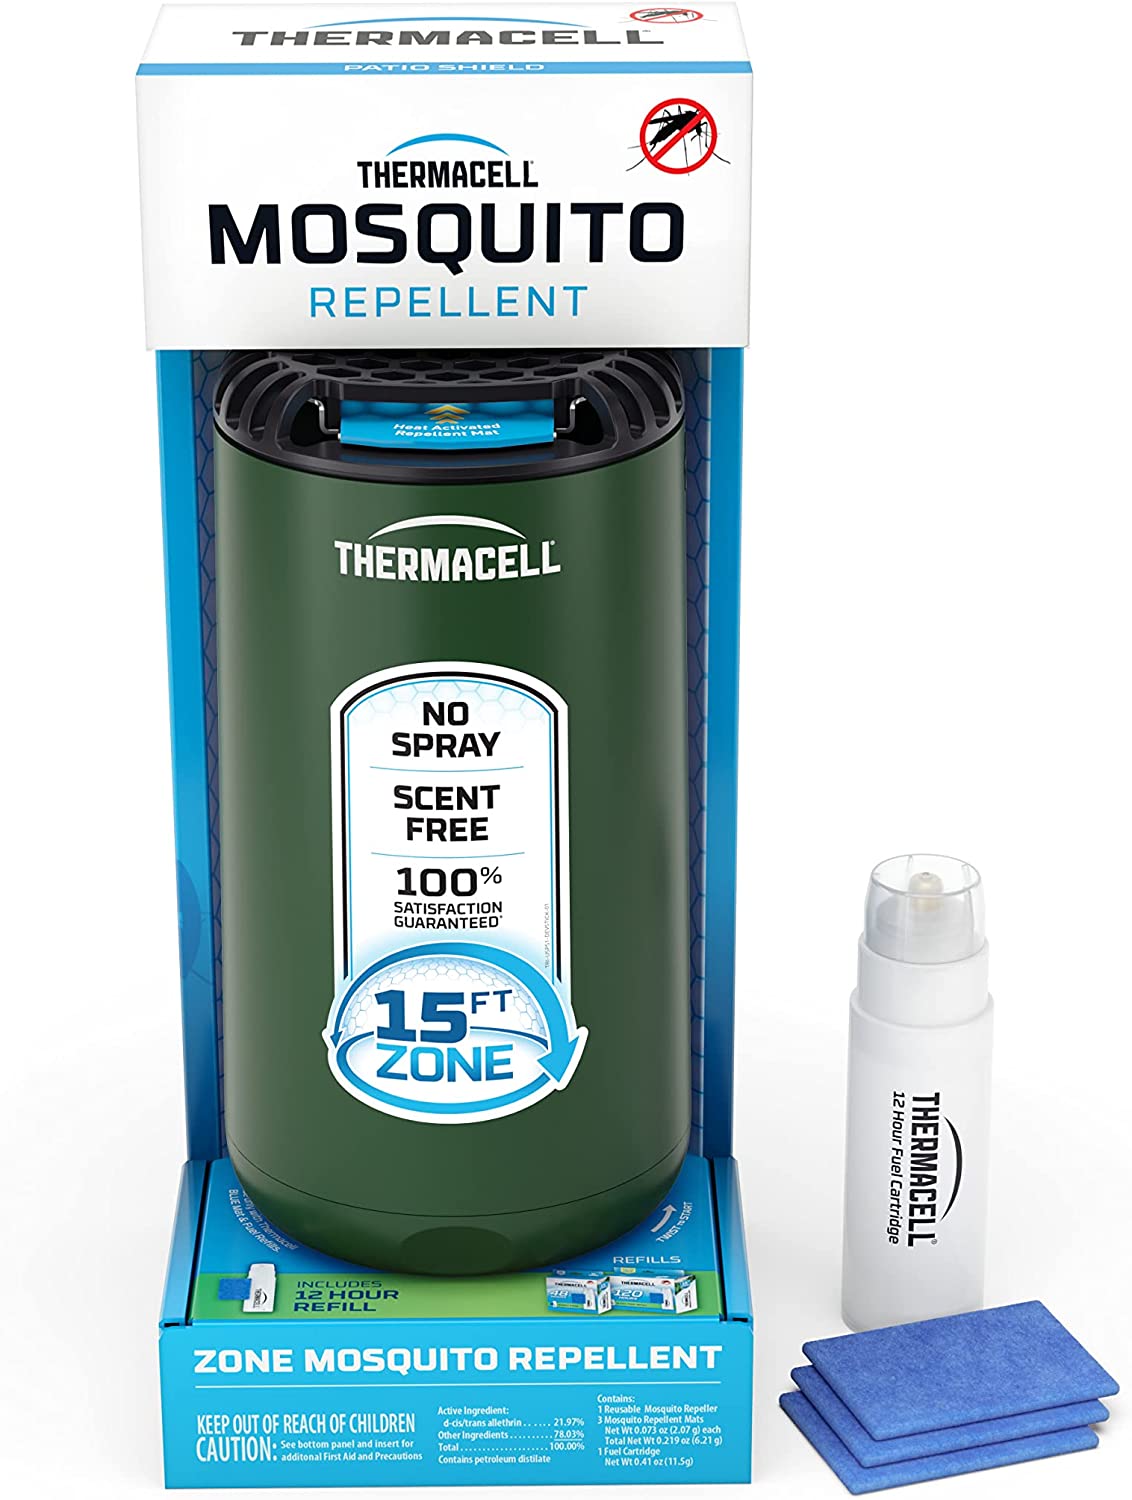 Thermacell Patio Shield Mosquito Repeller $14.99 shipped w/ Prime